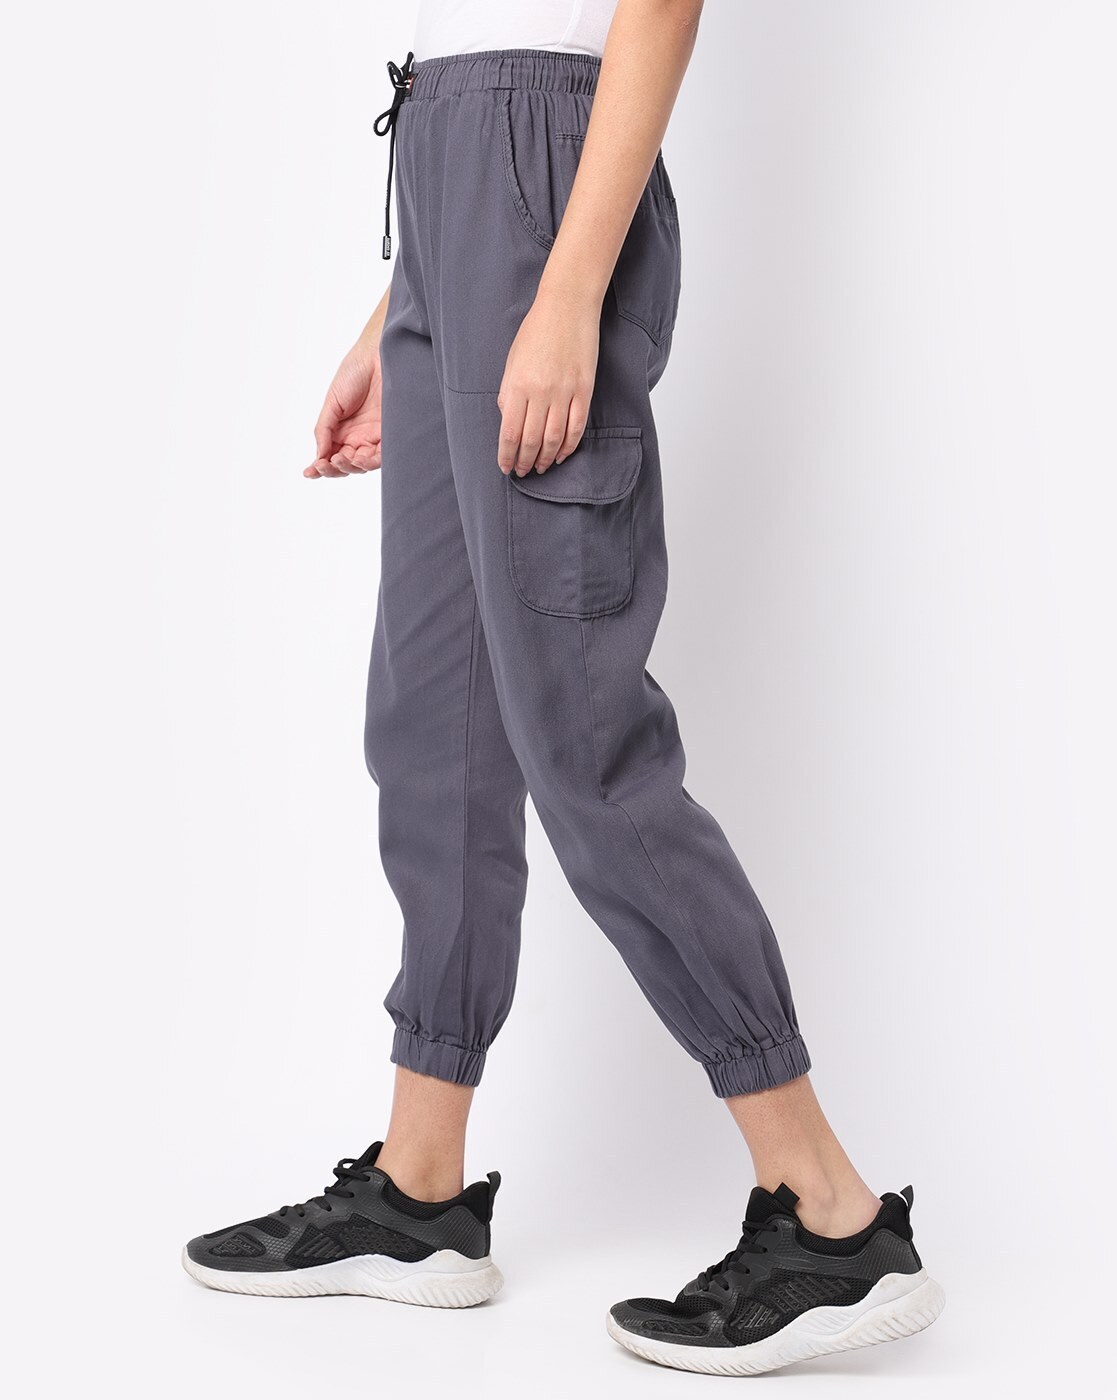 Best Deal for HUANKD Cargo Pants for Women, Grey Sweatpants Christmas